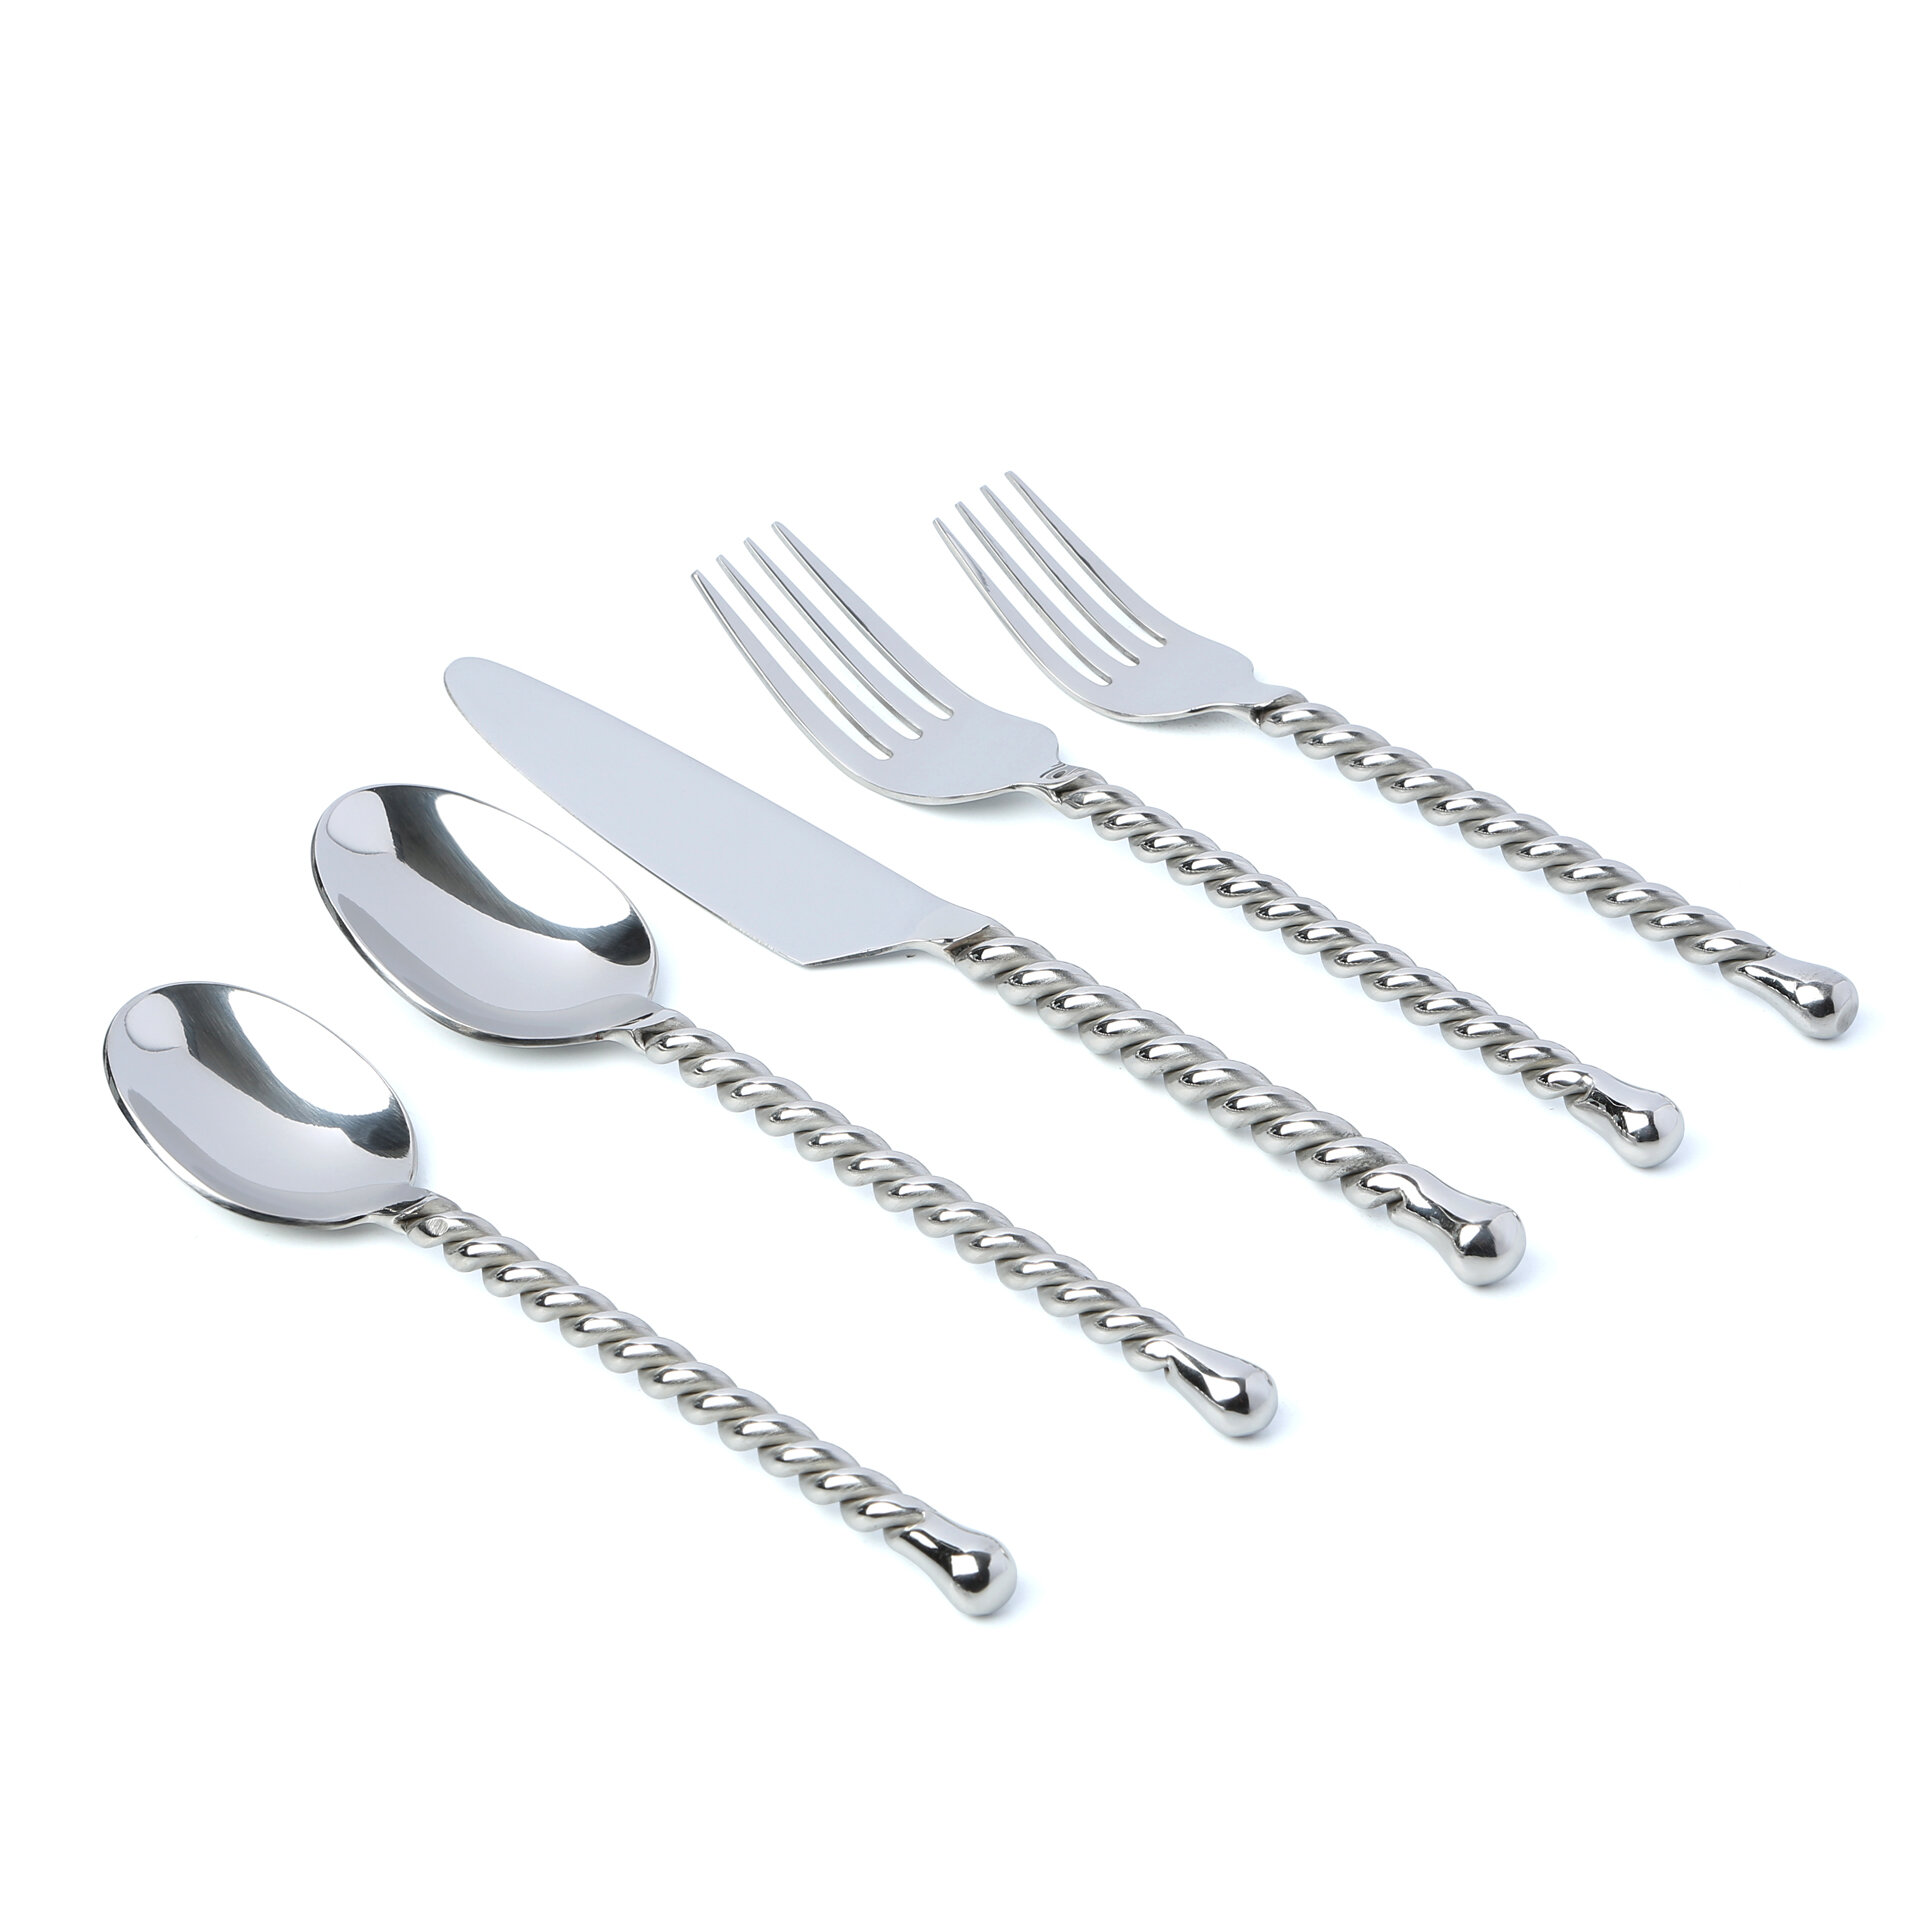 Gourmet Settings Stainless TWIST Flatware Silverware NEW Your Choice 